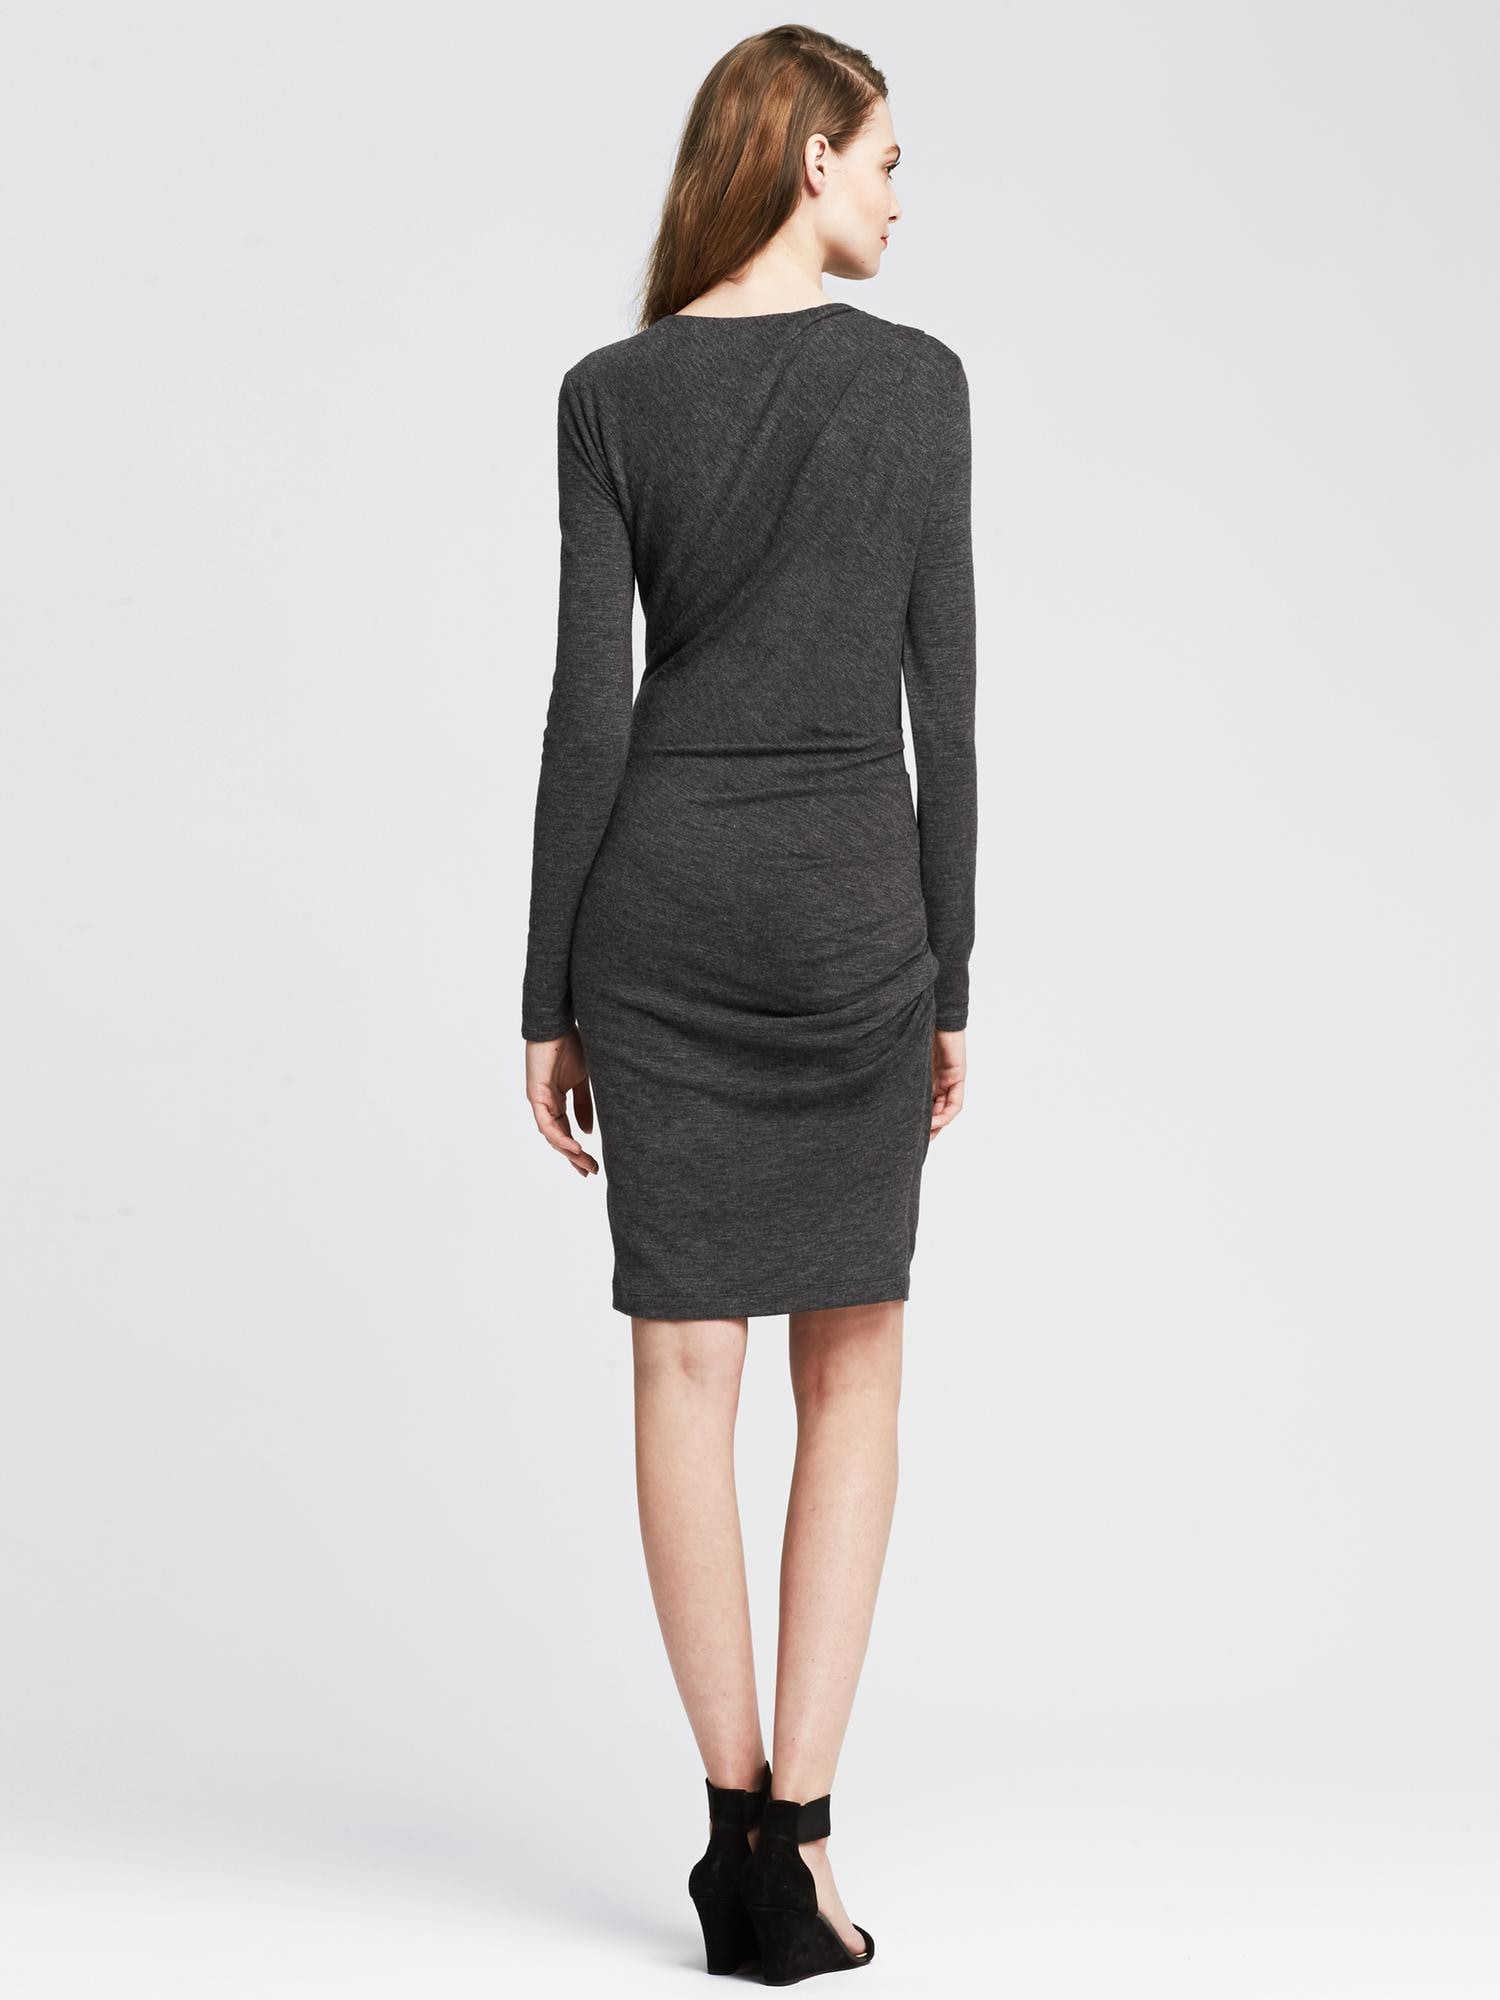 Ruched Gray Jersey Dress